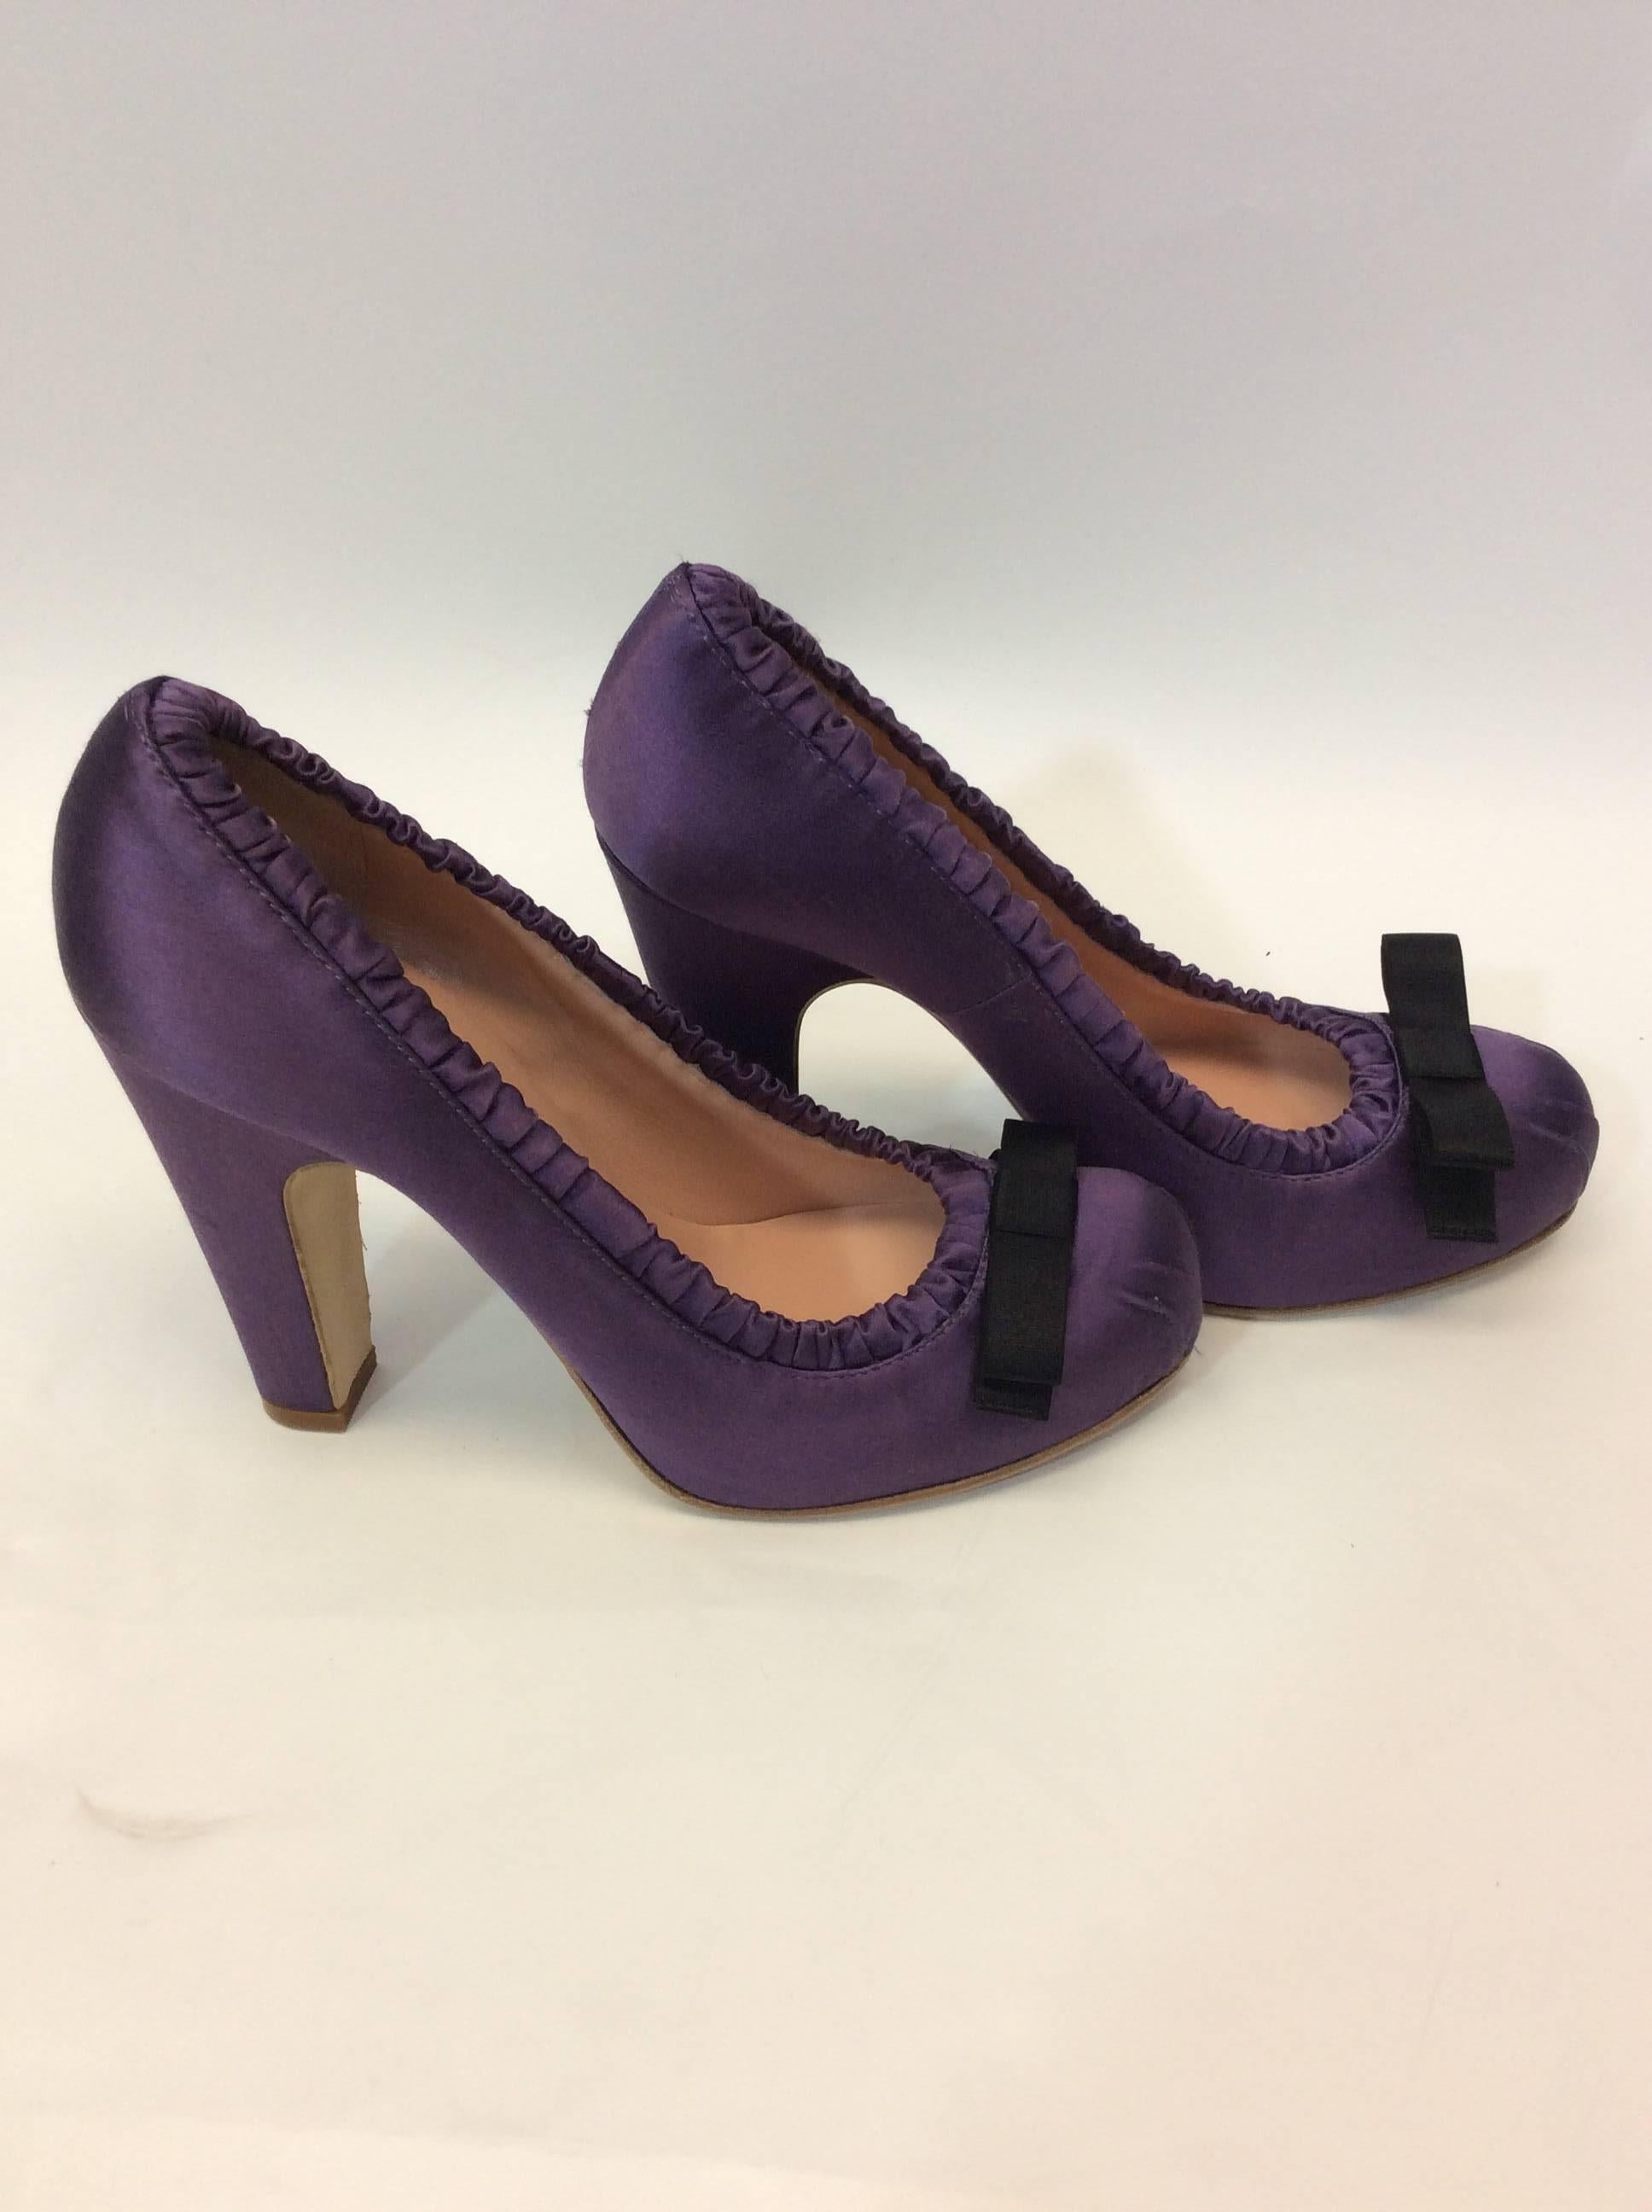 Women's Marc by Marc Jacobs Purple Satin Pumps with Black Bow Detail For Sale